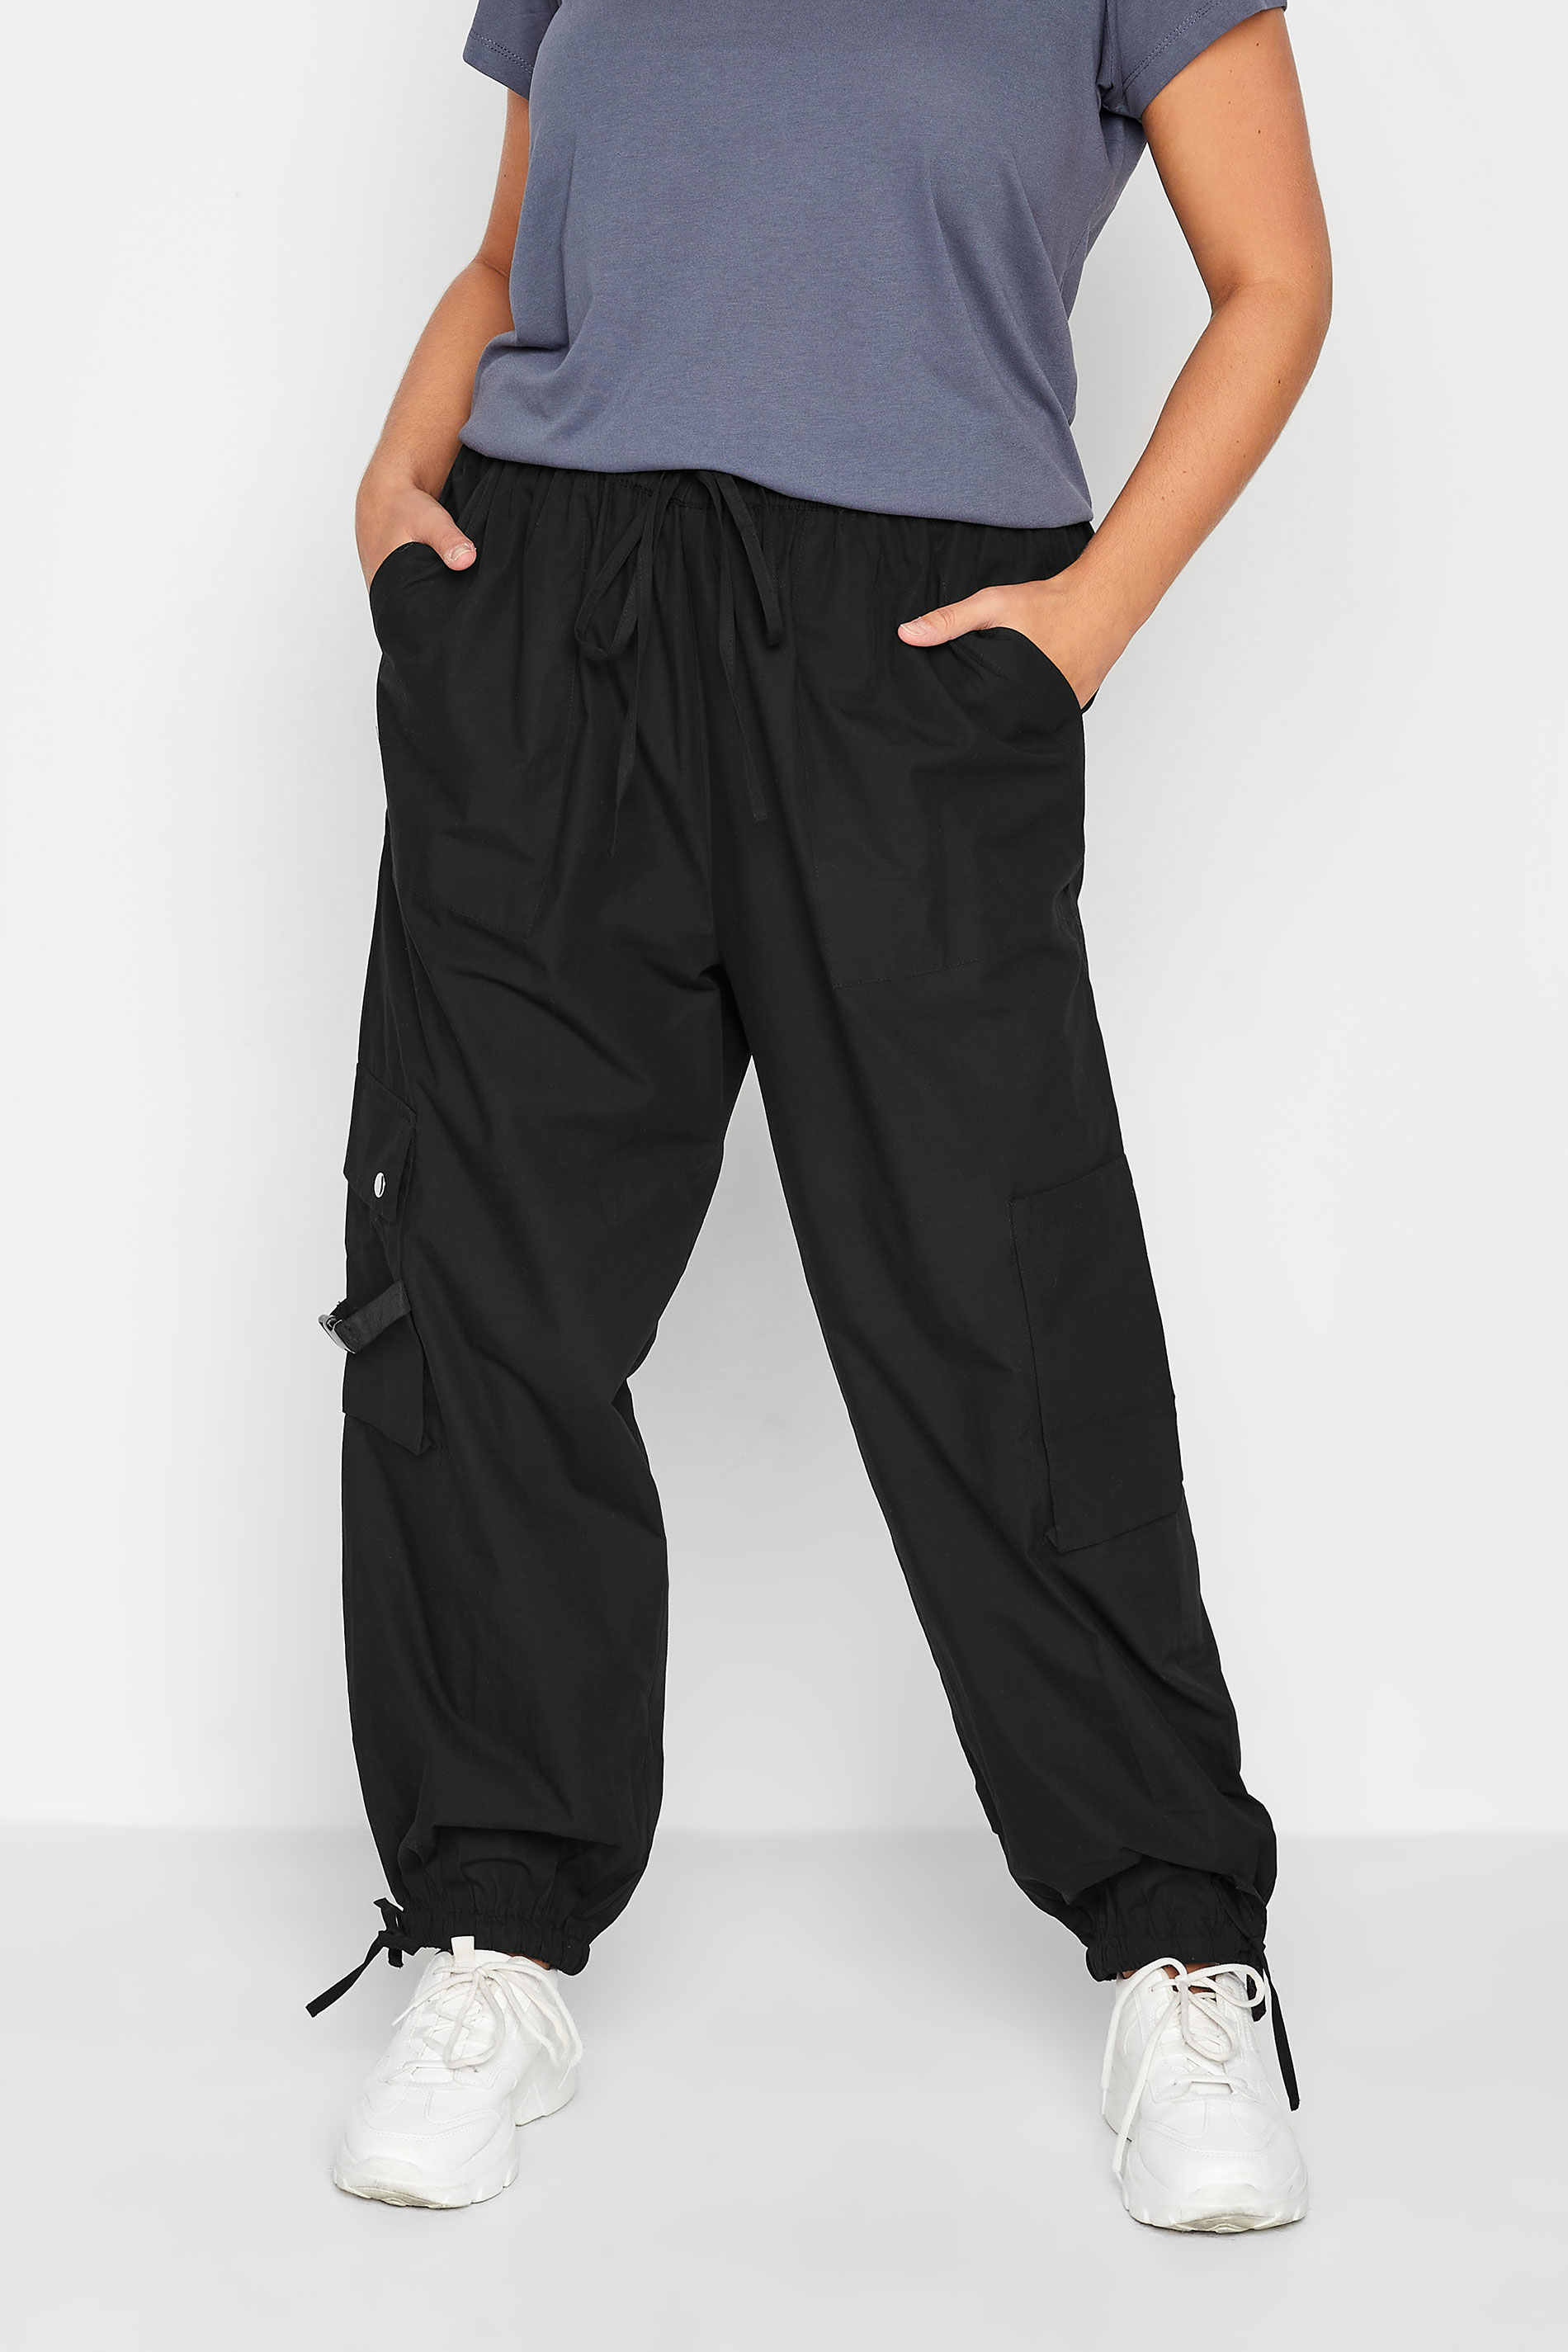 LIMITED COLLECTION Plus Size Black Pull On Cargo Trousers | Yours Clothing 1